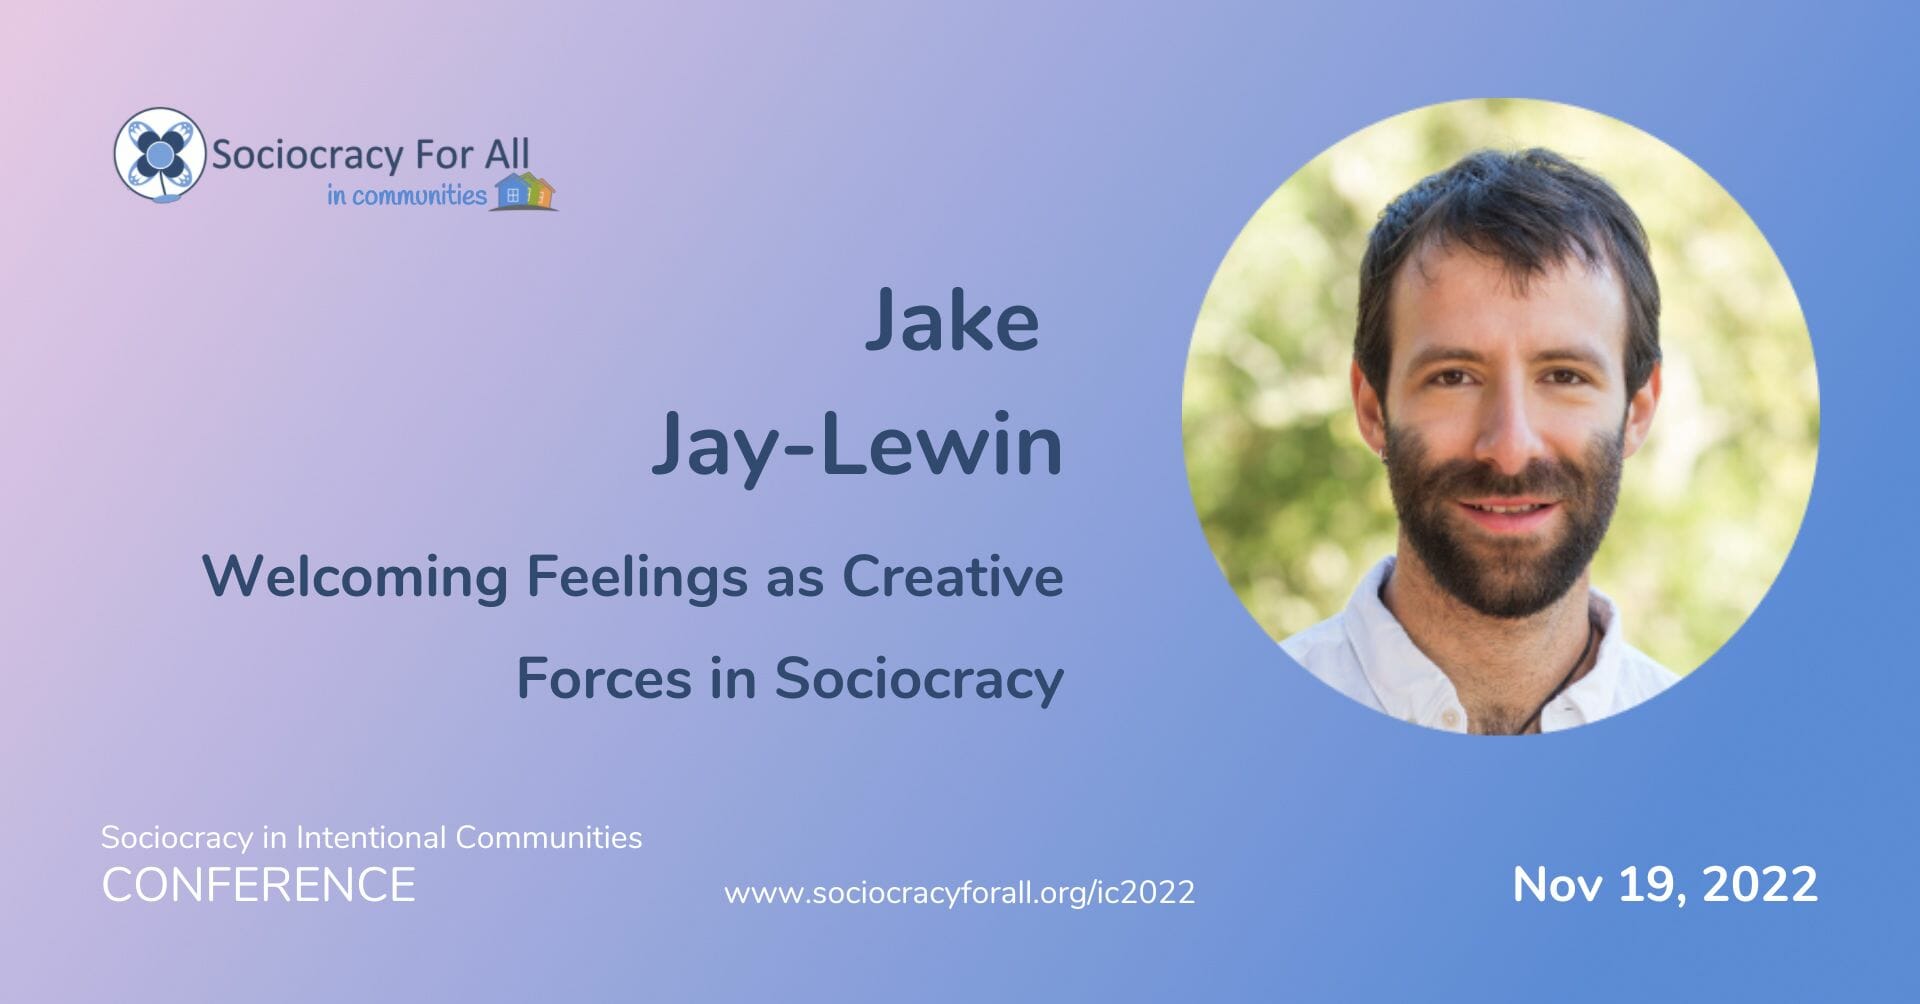 jake jay lewin sociocracy in intentional communities conference 2022 - - Sociocracy For All